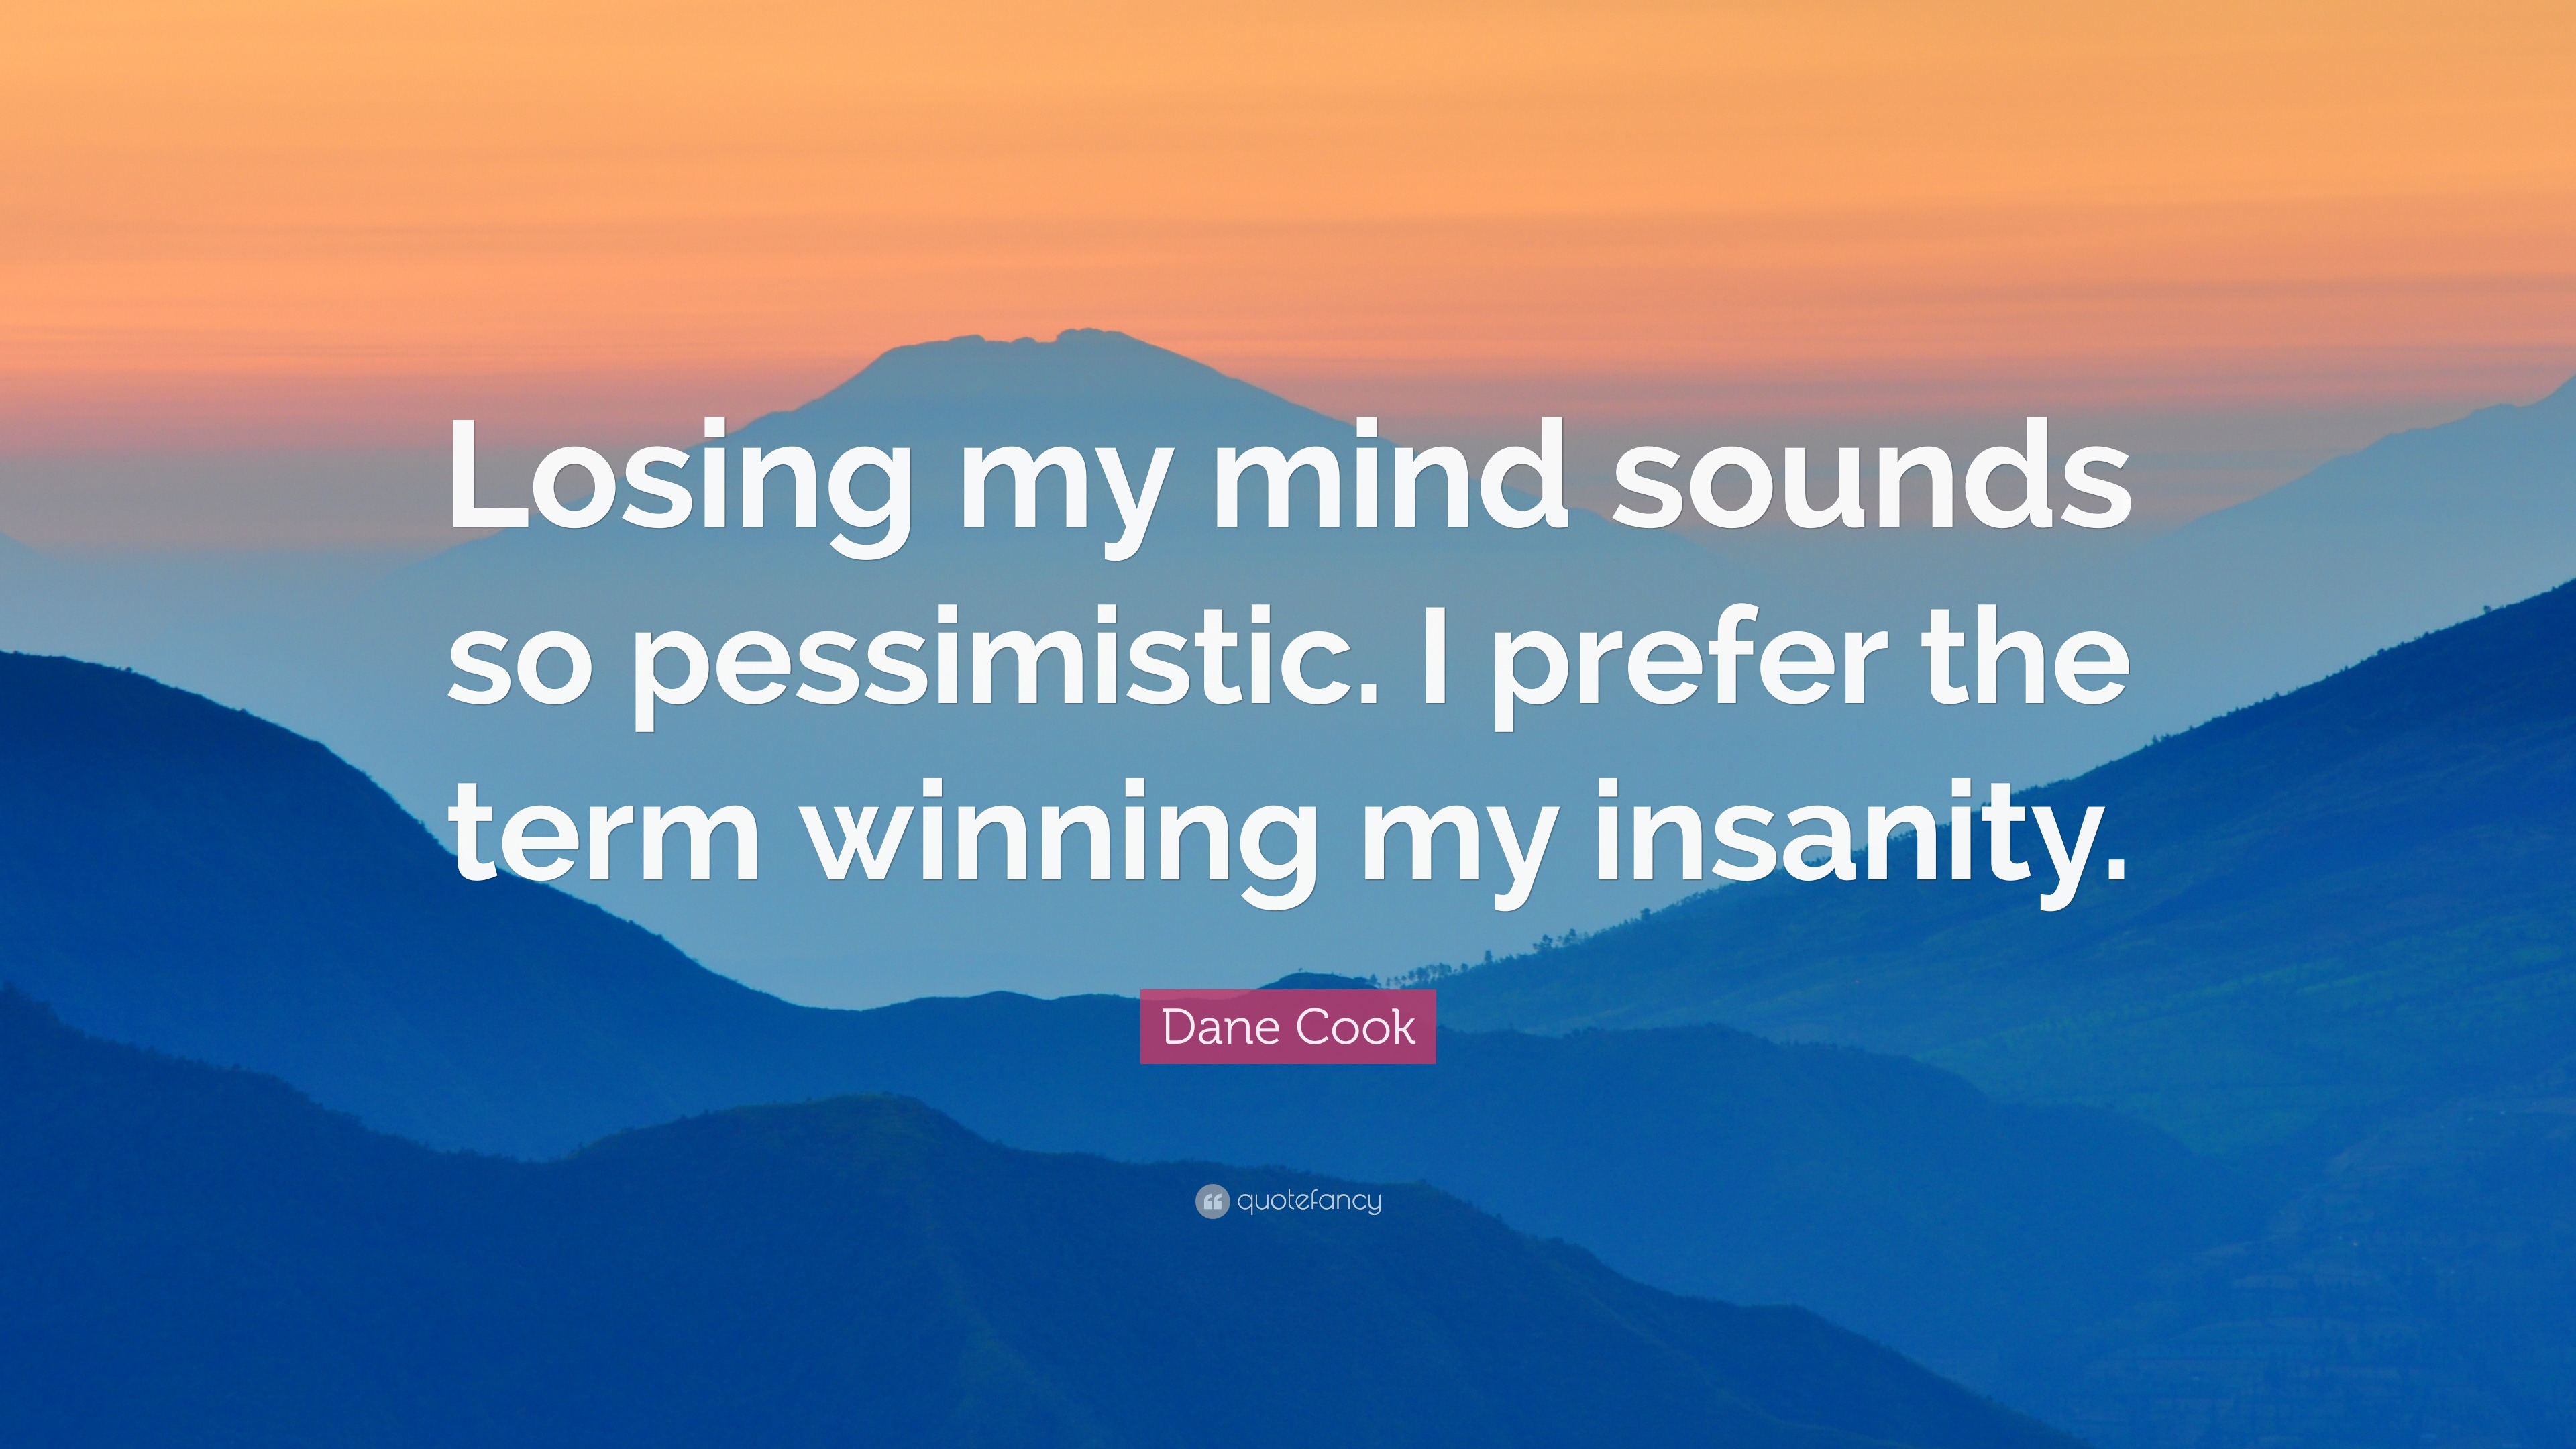 Dane Cook Quote: “Losing my mind sounds so pessimistic. I prefer the ...